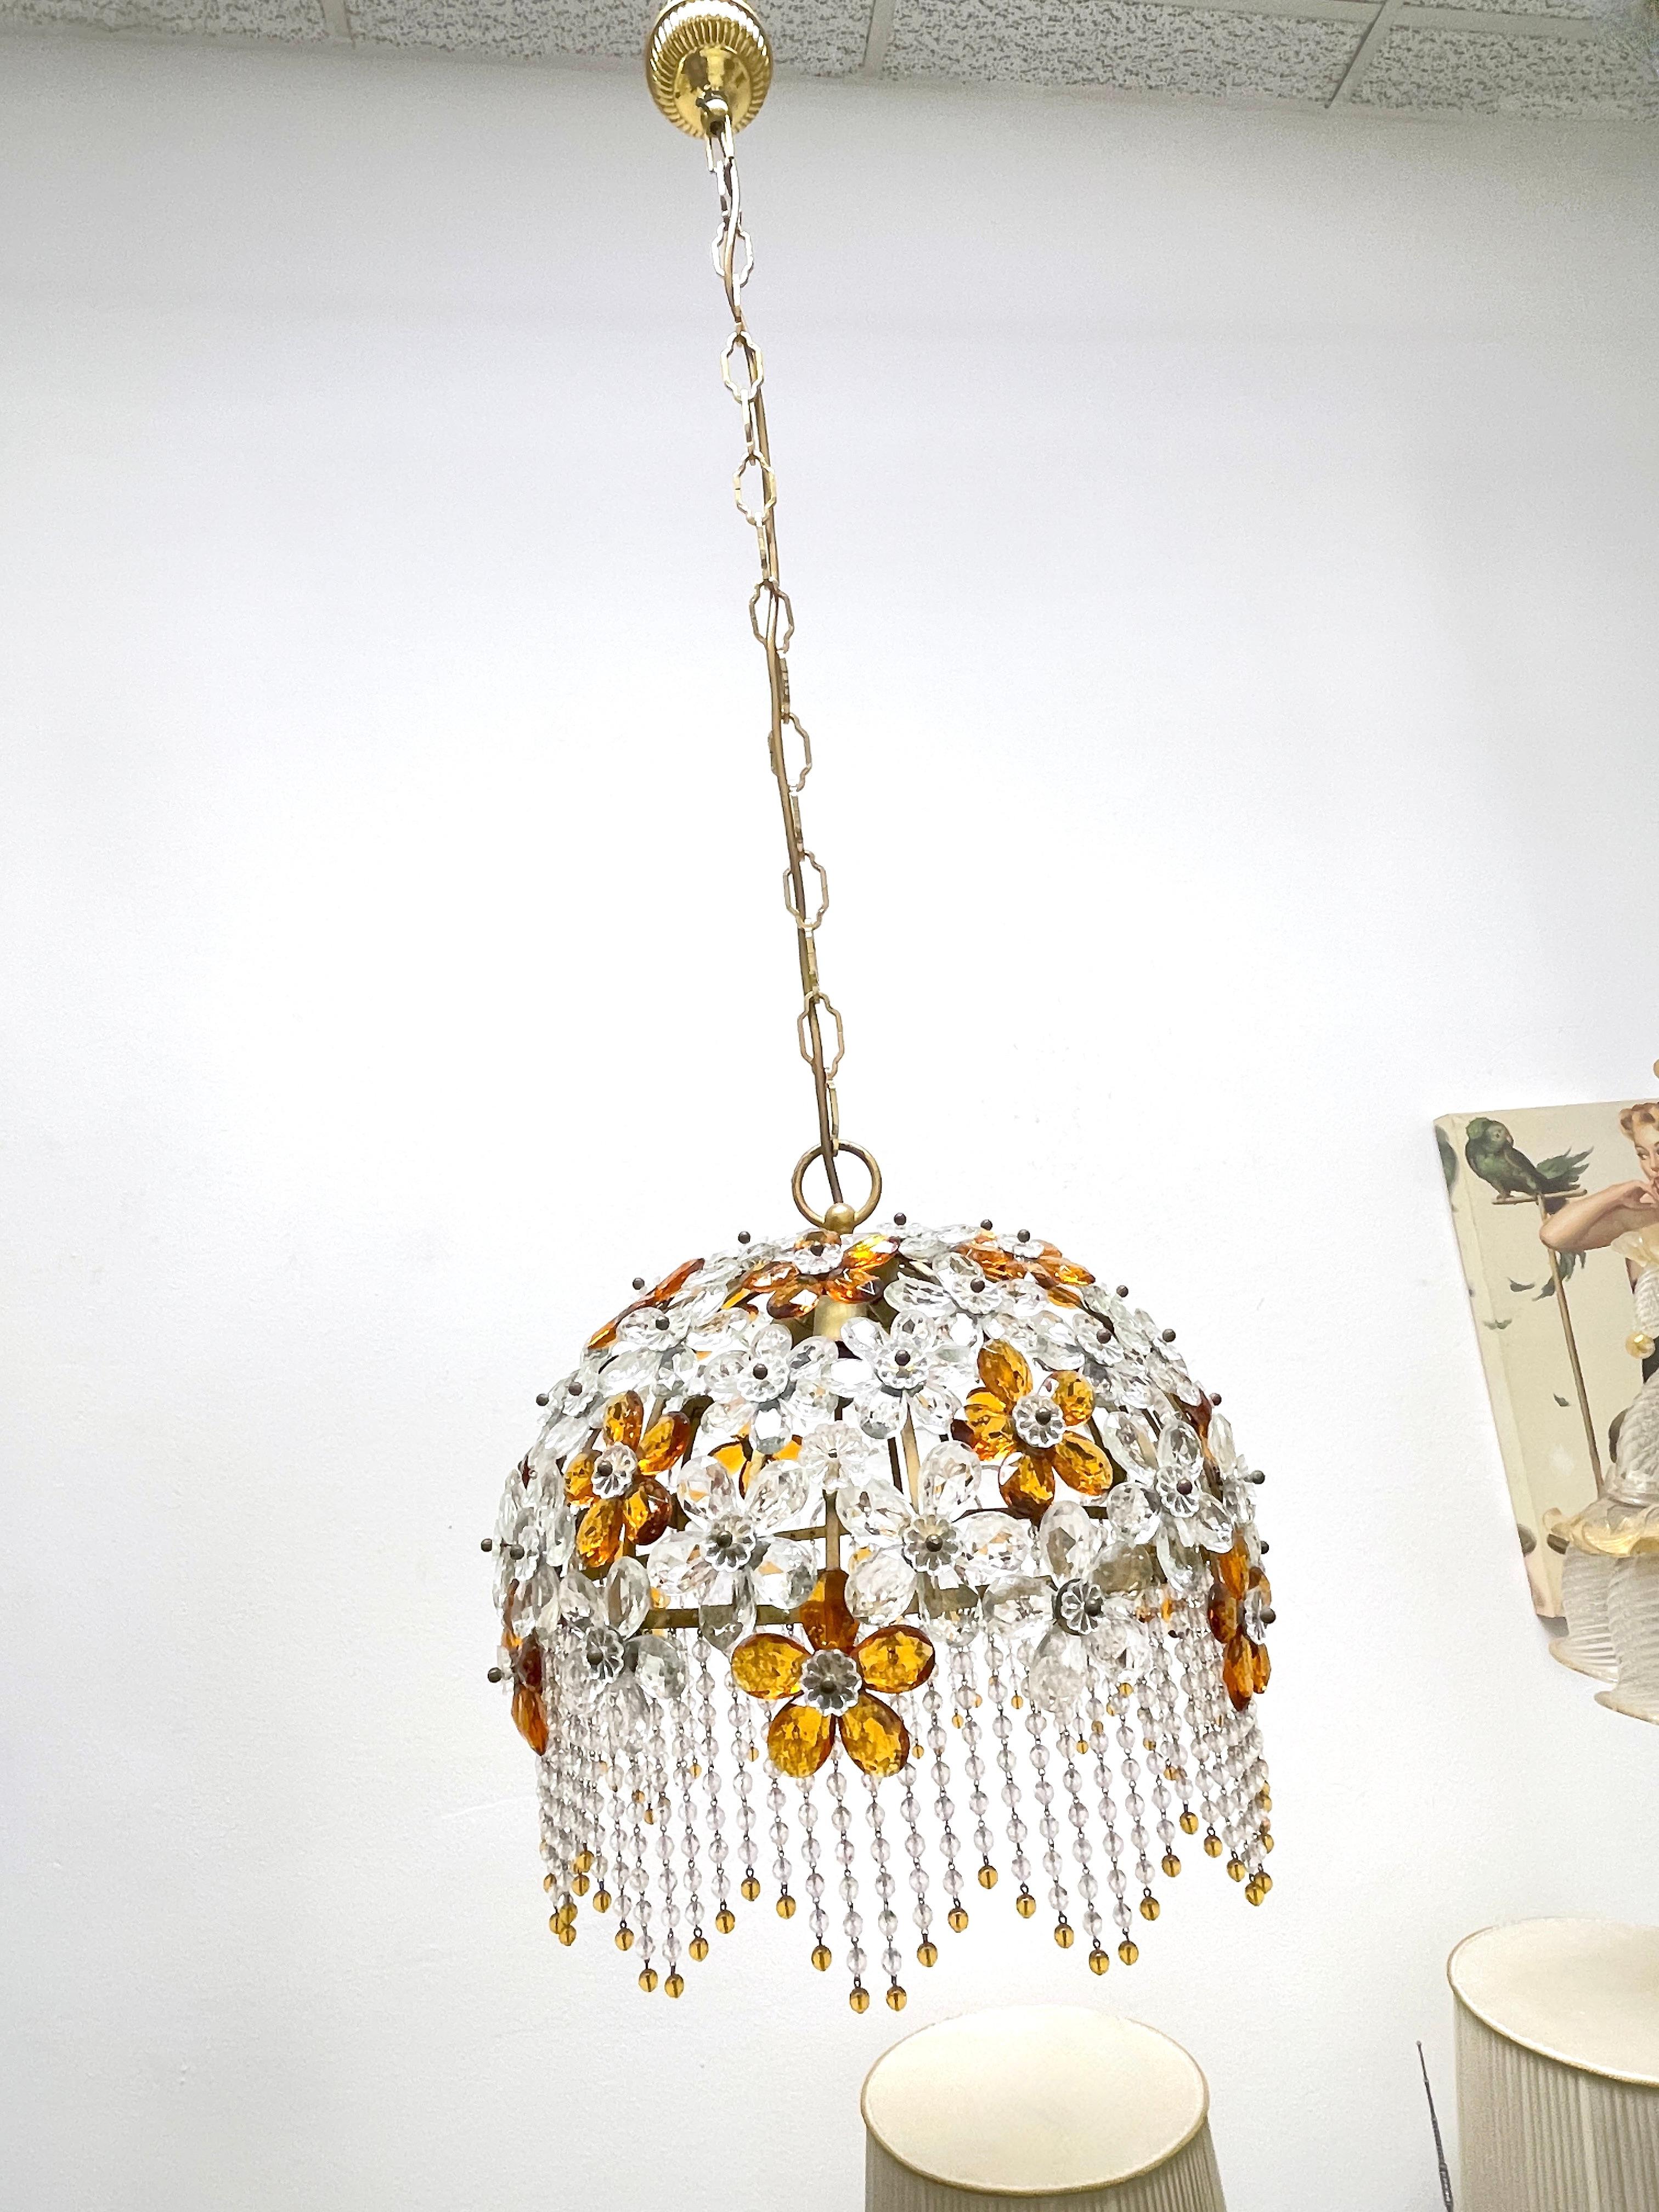 Beautiful chandelier made by Banci, Firenze, Italy. This light fixture is made of metal and lovely elements of glass in the style of leaf's and flowers. Gorgeous lamp with crystal glass, in very good vintage condition. It is a mix of amber and clear